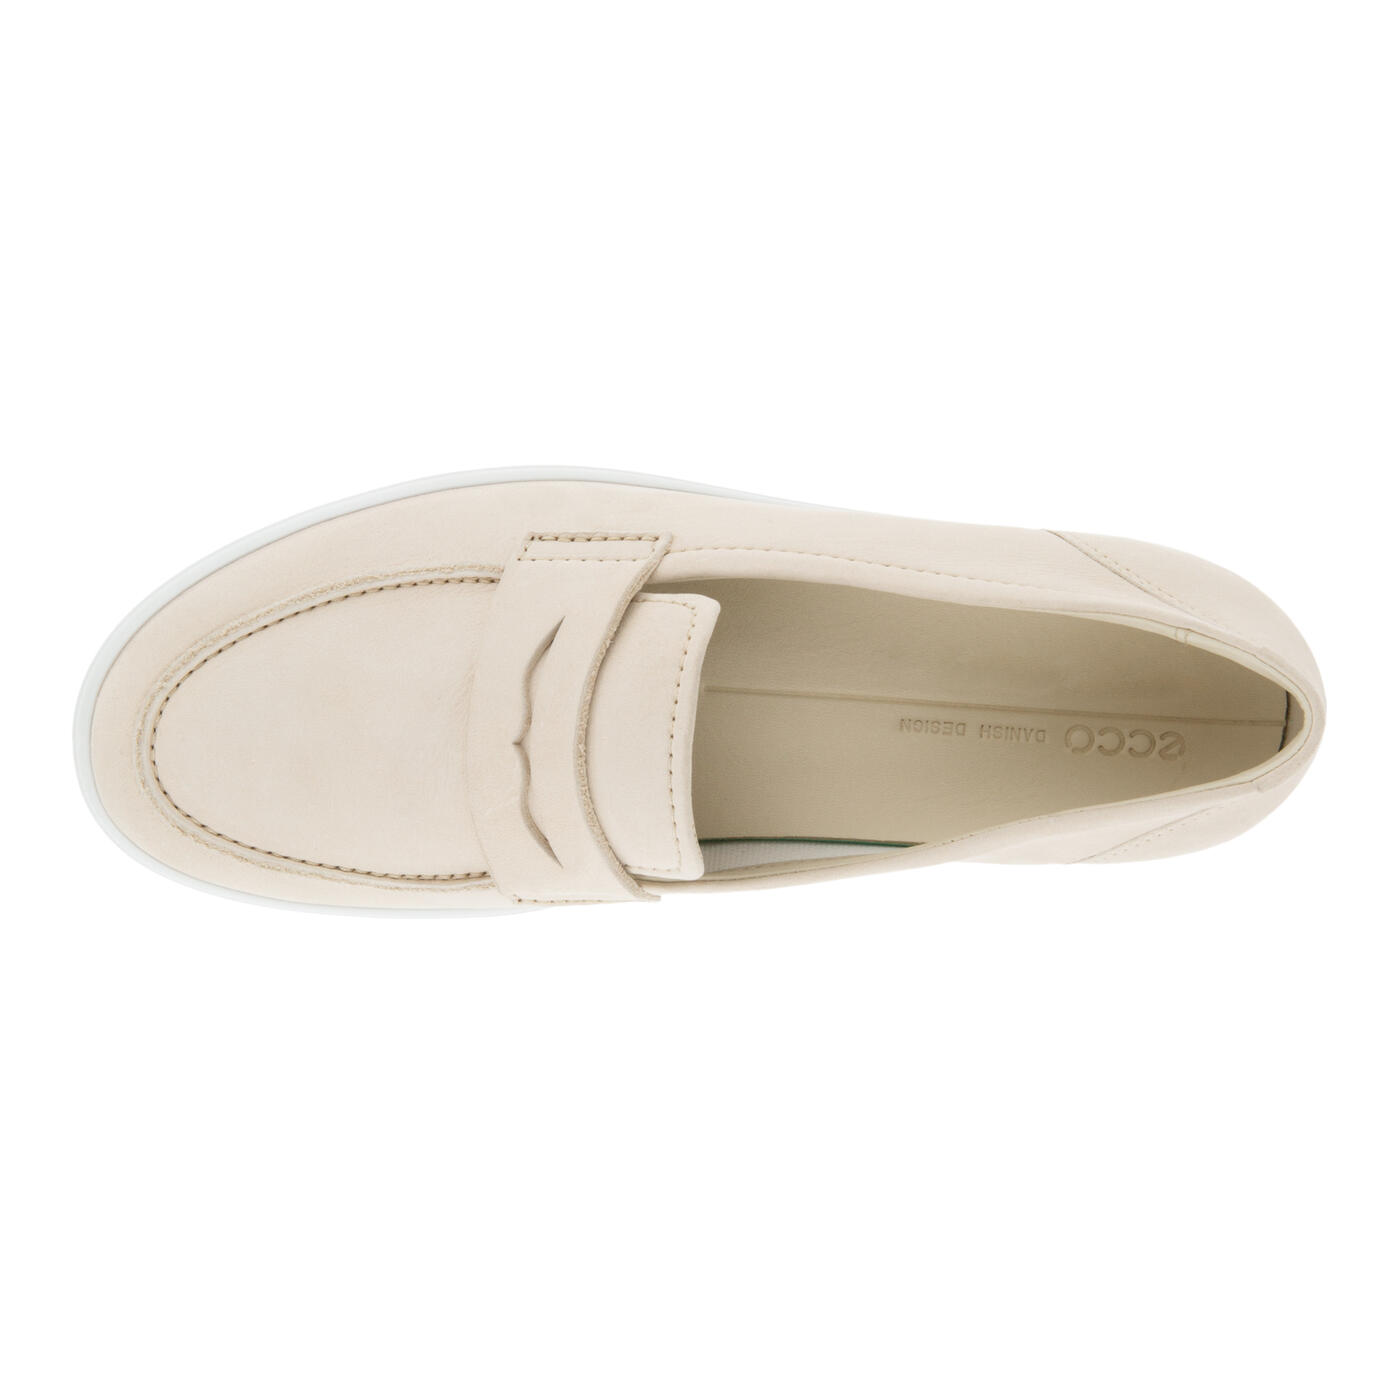 Women's Soft 7 Loafers | Official Store | ECCO® Shoes